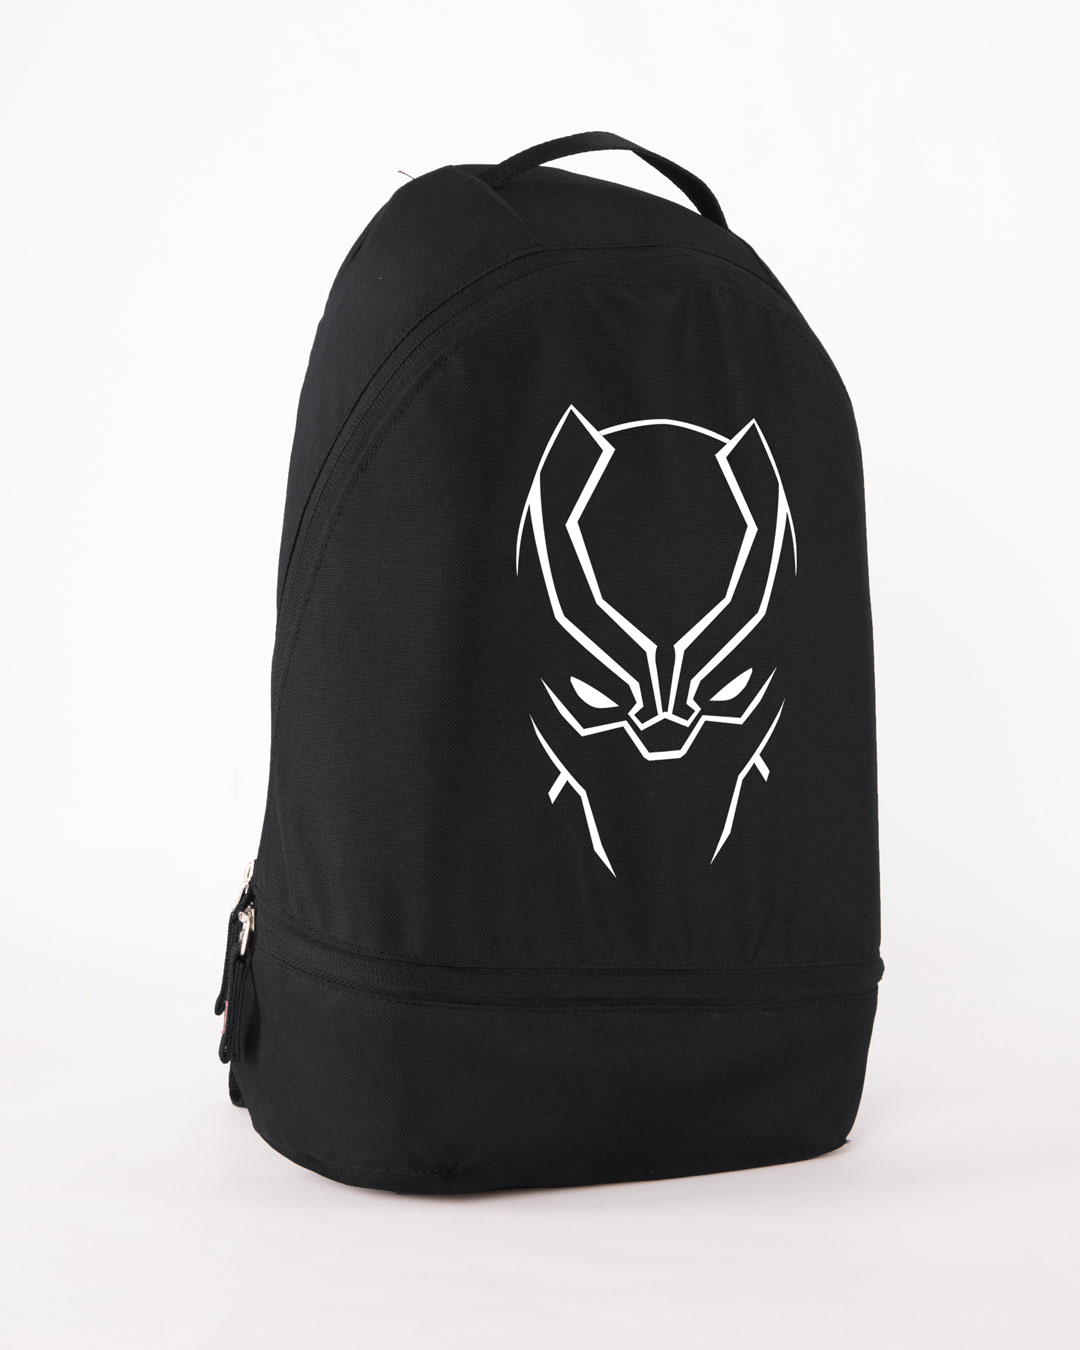 Shop Black Panther Minimal Glow In Dark Small Backpack (AVL) -Back